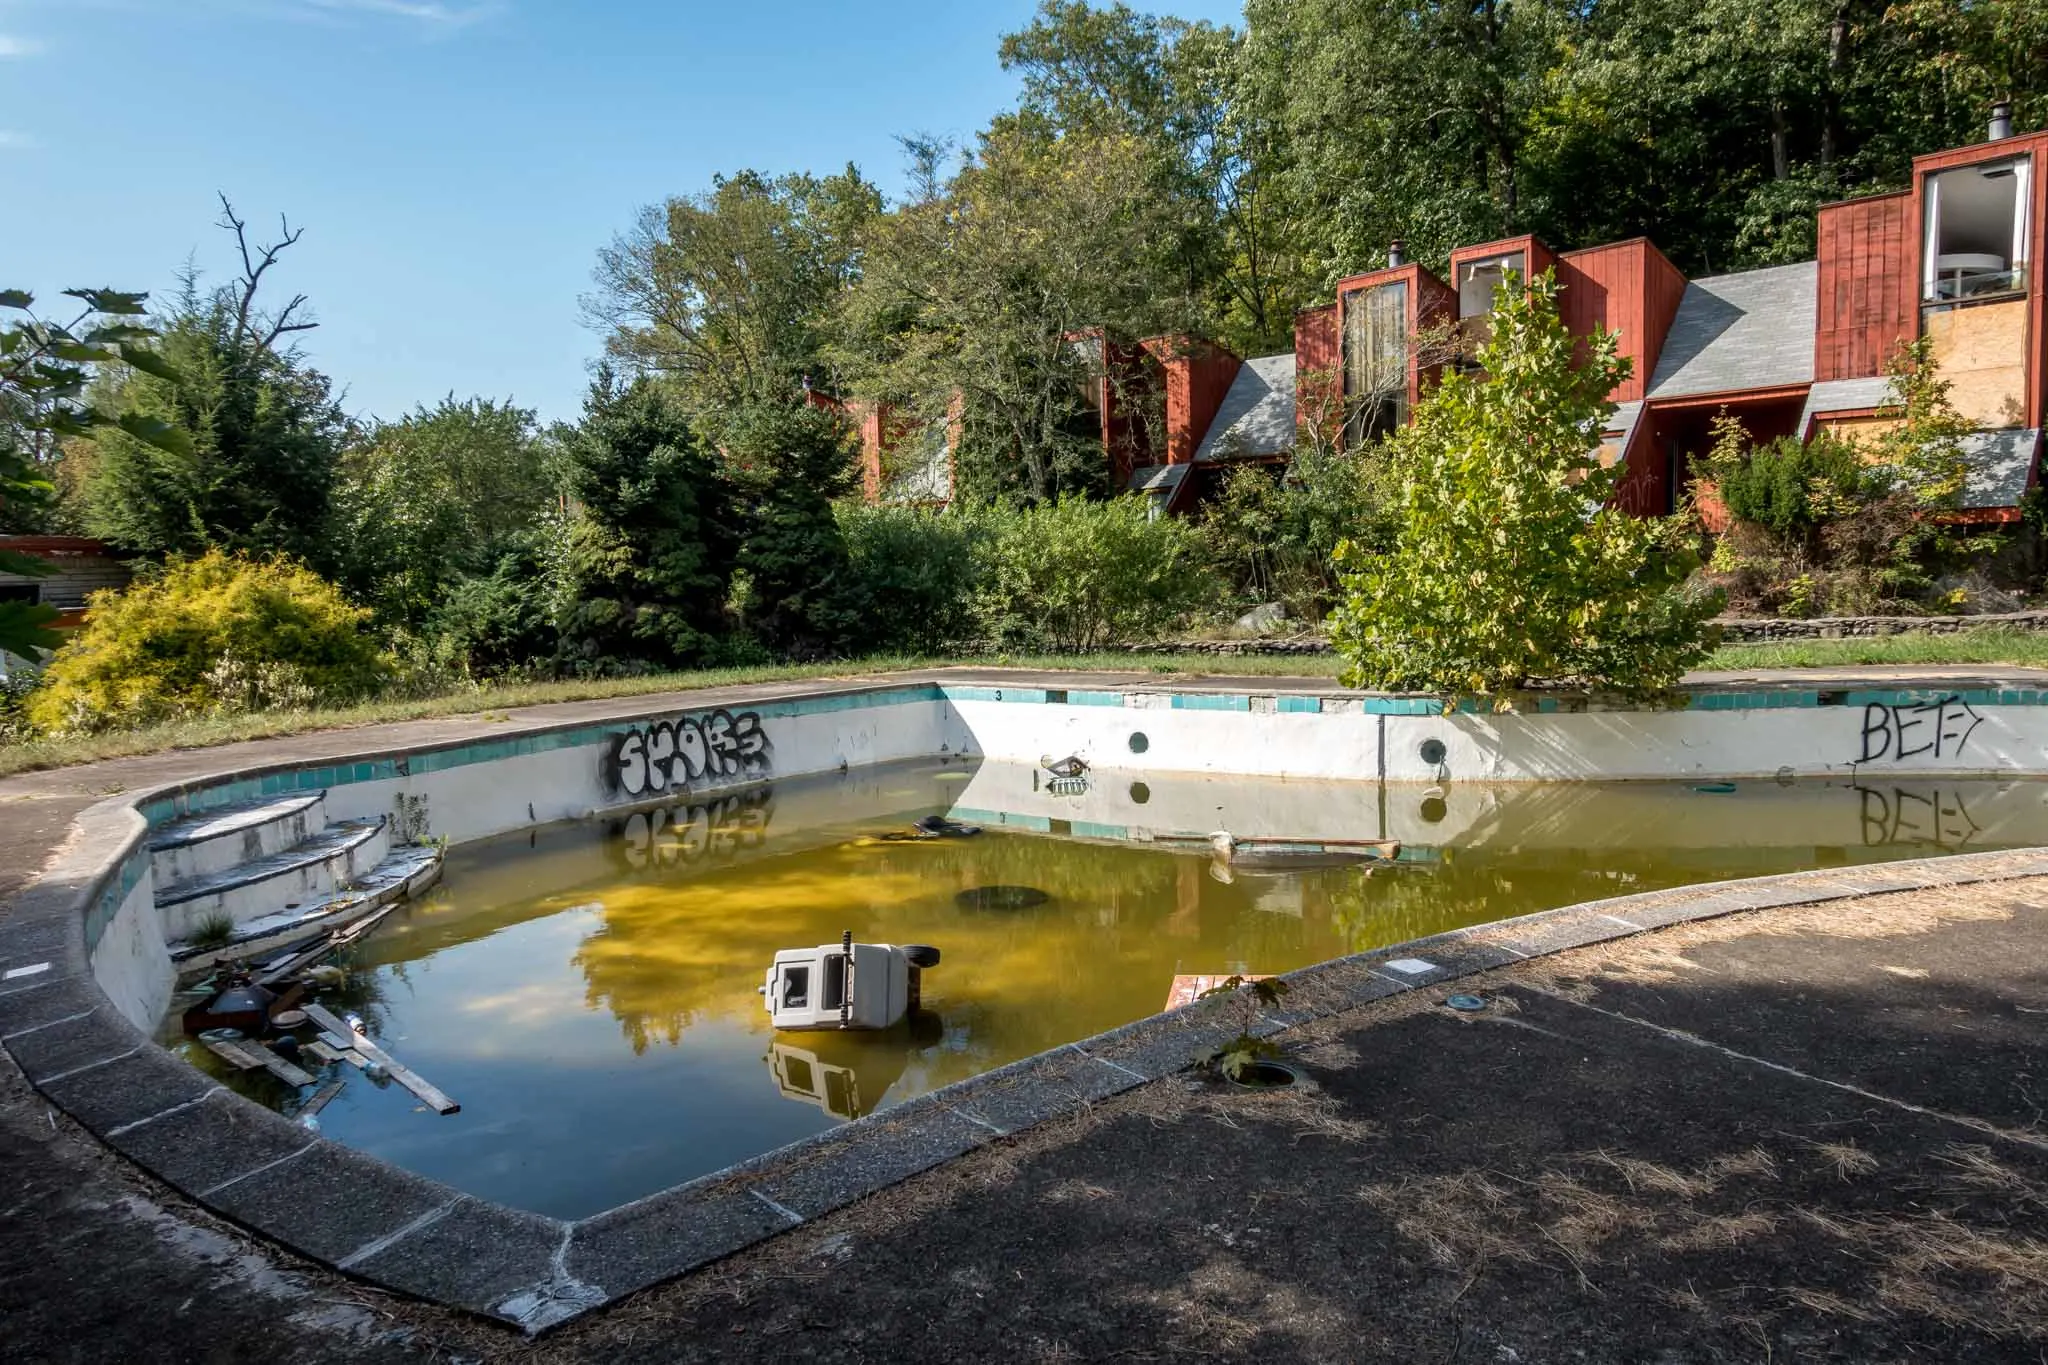 The outdoor pool at the abandoned Penn Hills Resort